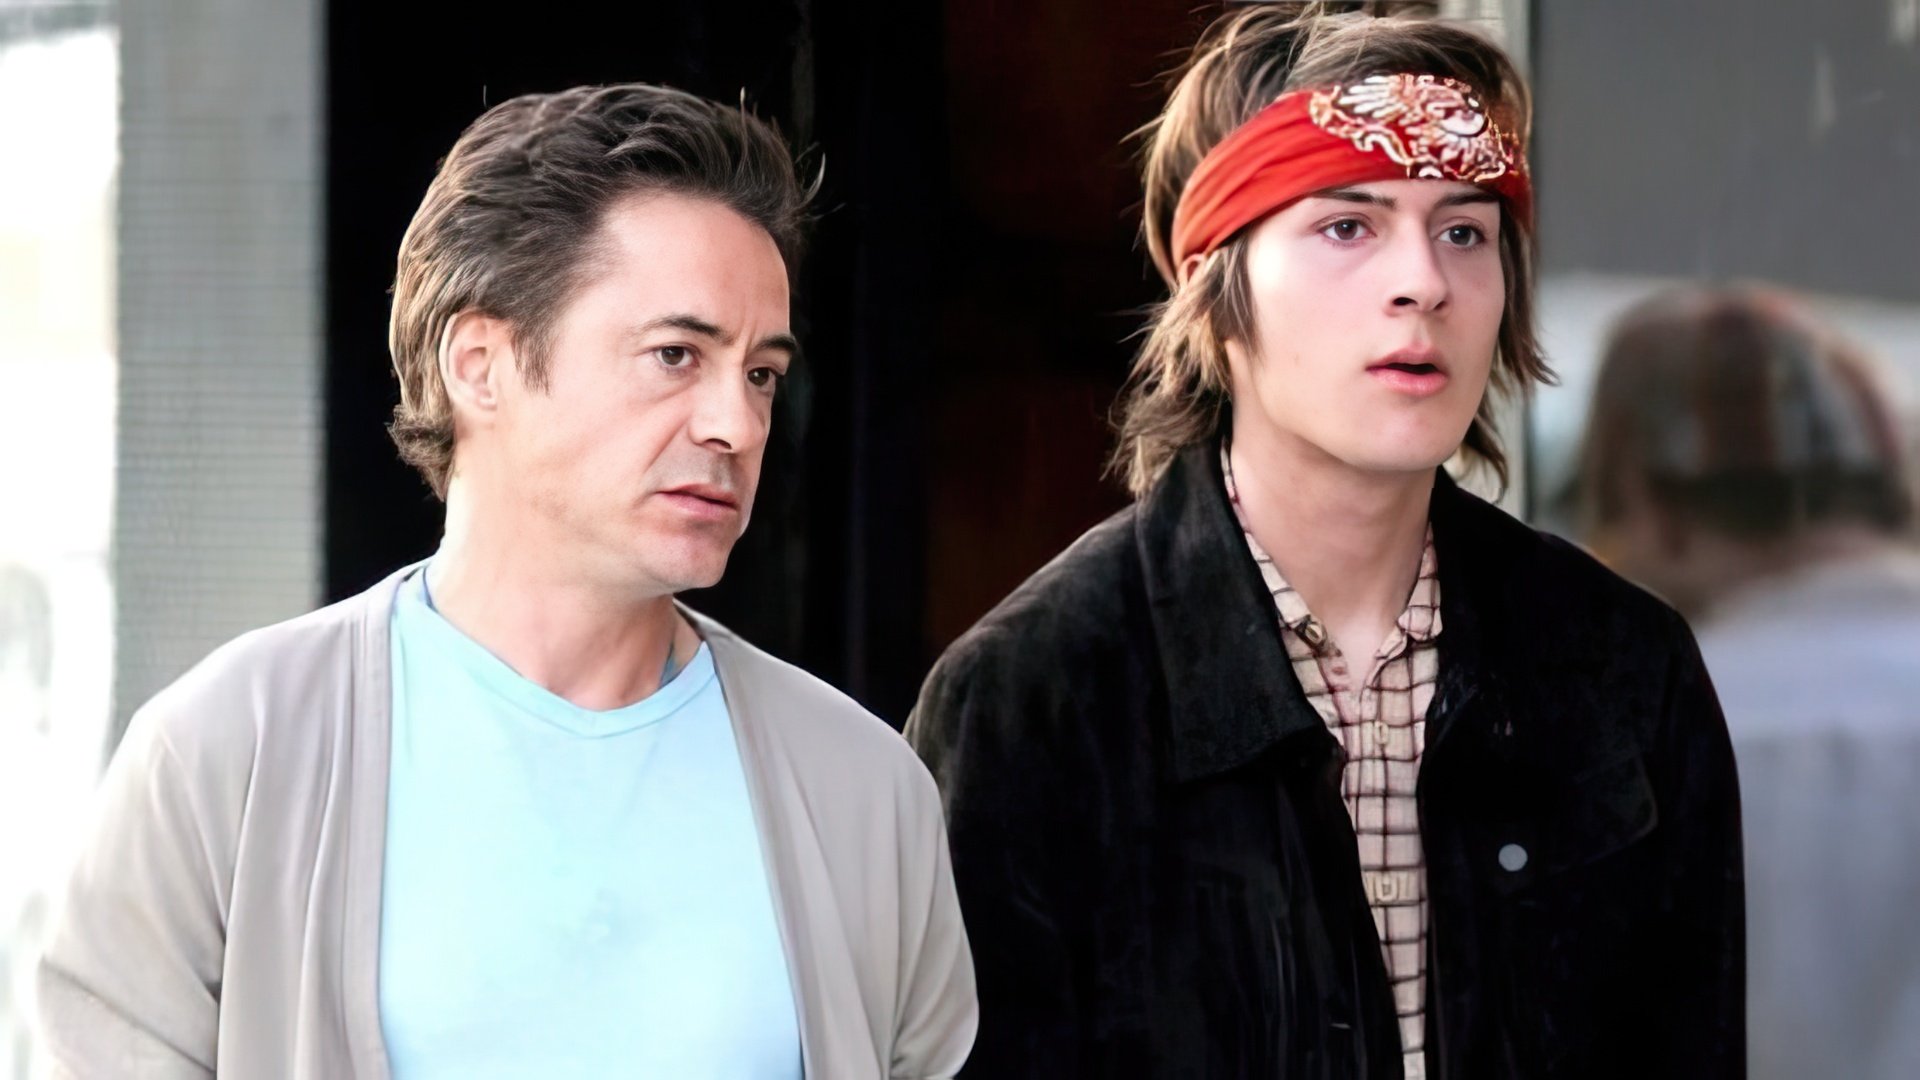 Indio, the eldest son of Robert Downey, also got involved in trouble because of drug using